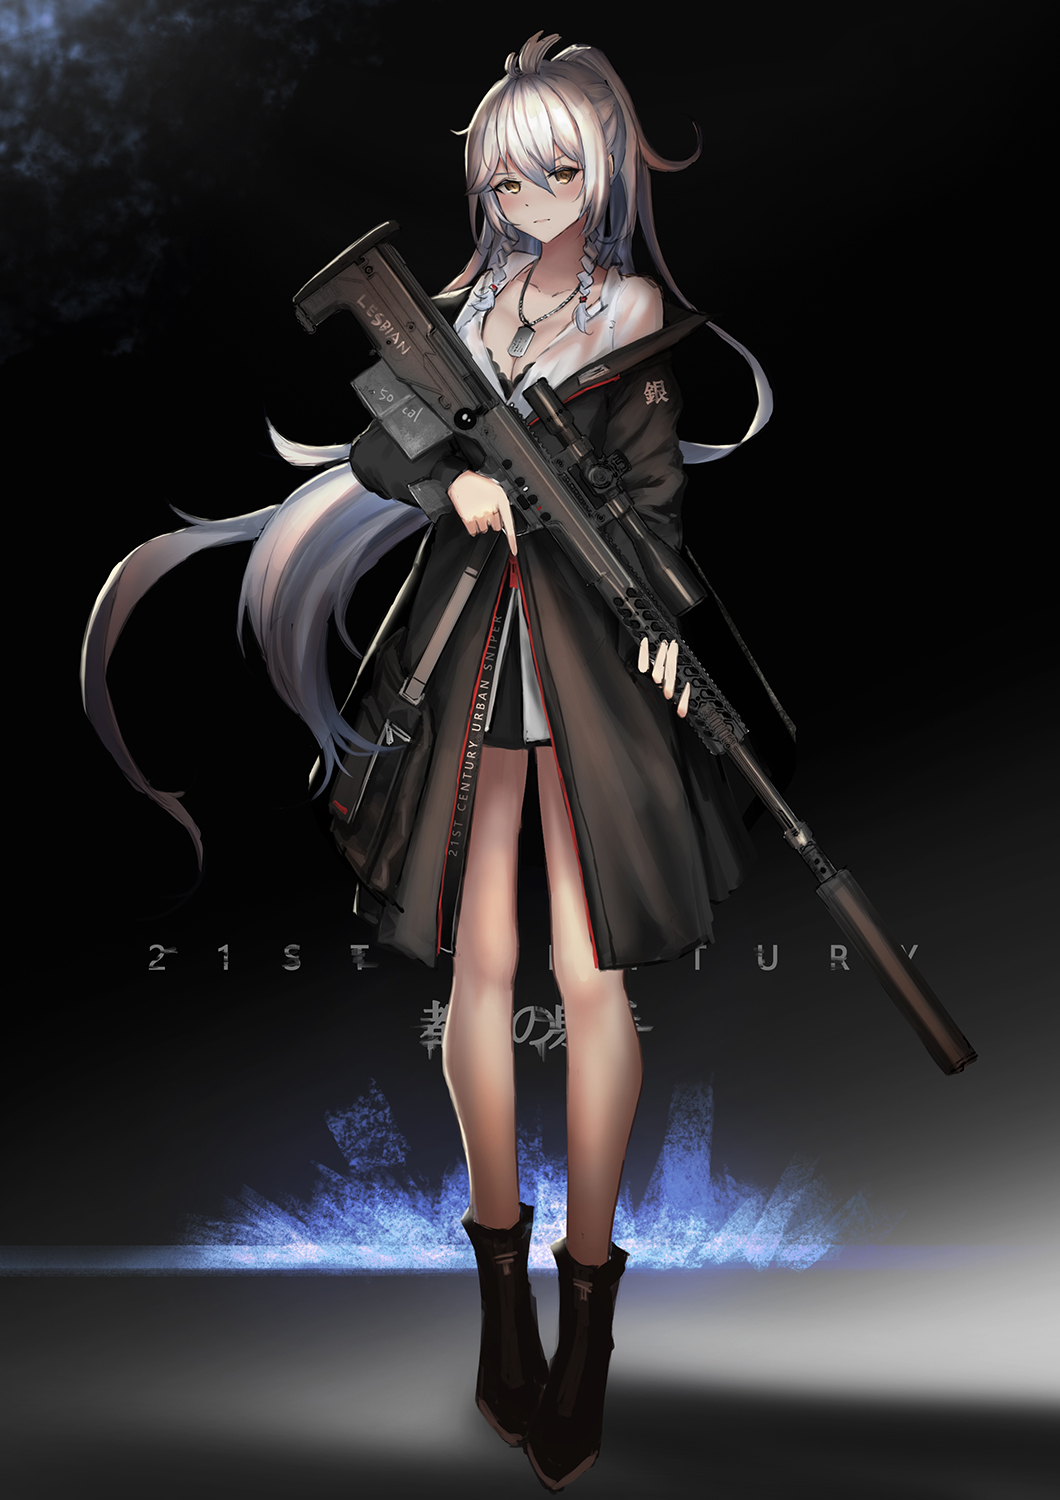 Anime Girls Yurichtofen Portrait Display Anime Silver Hair Girl With Weapon 1060x1500